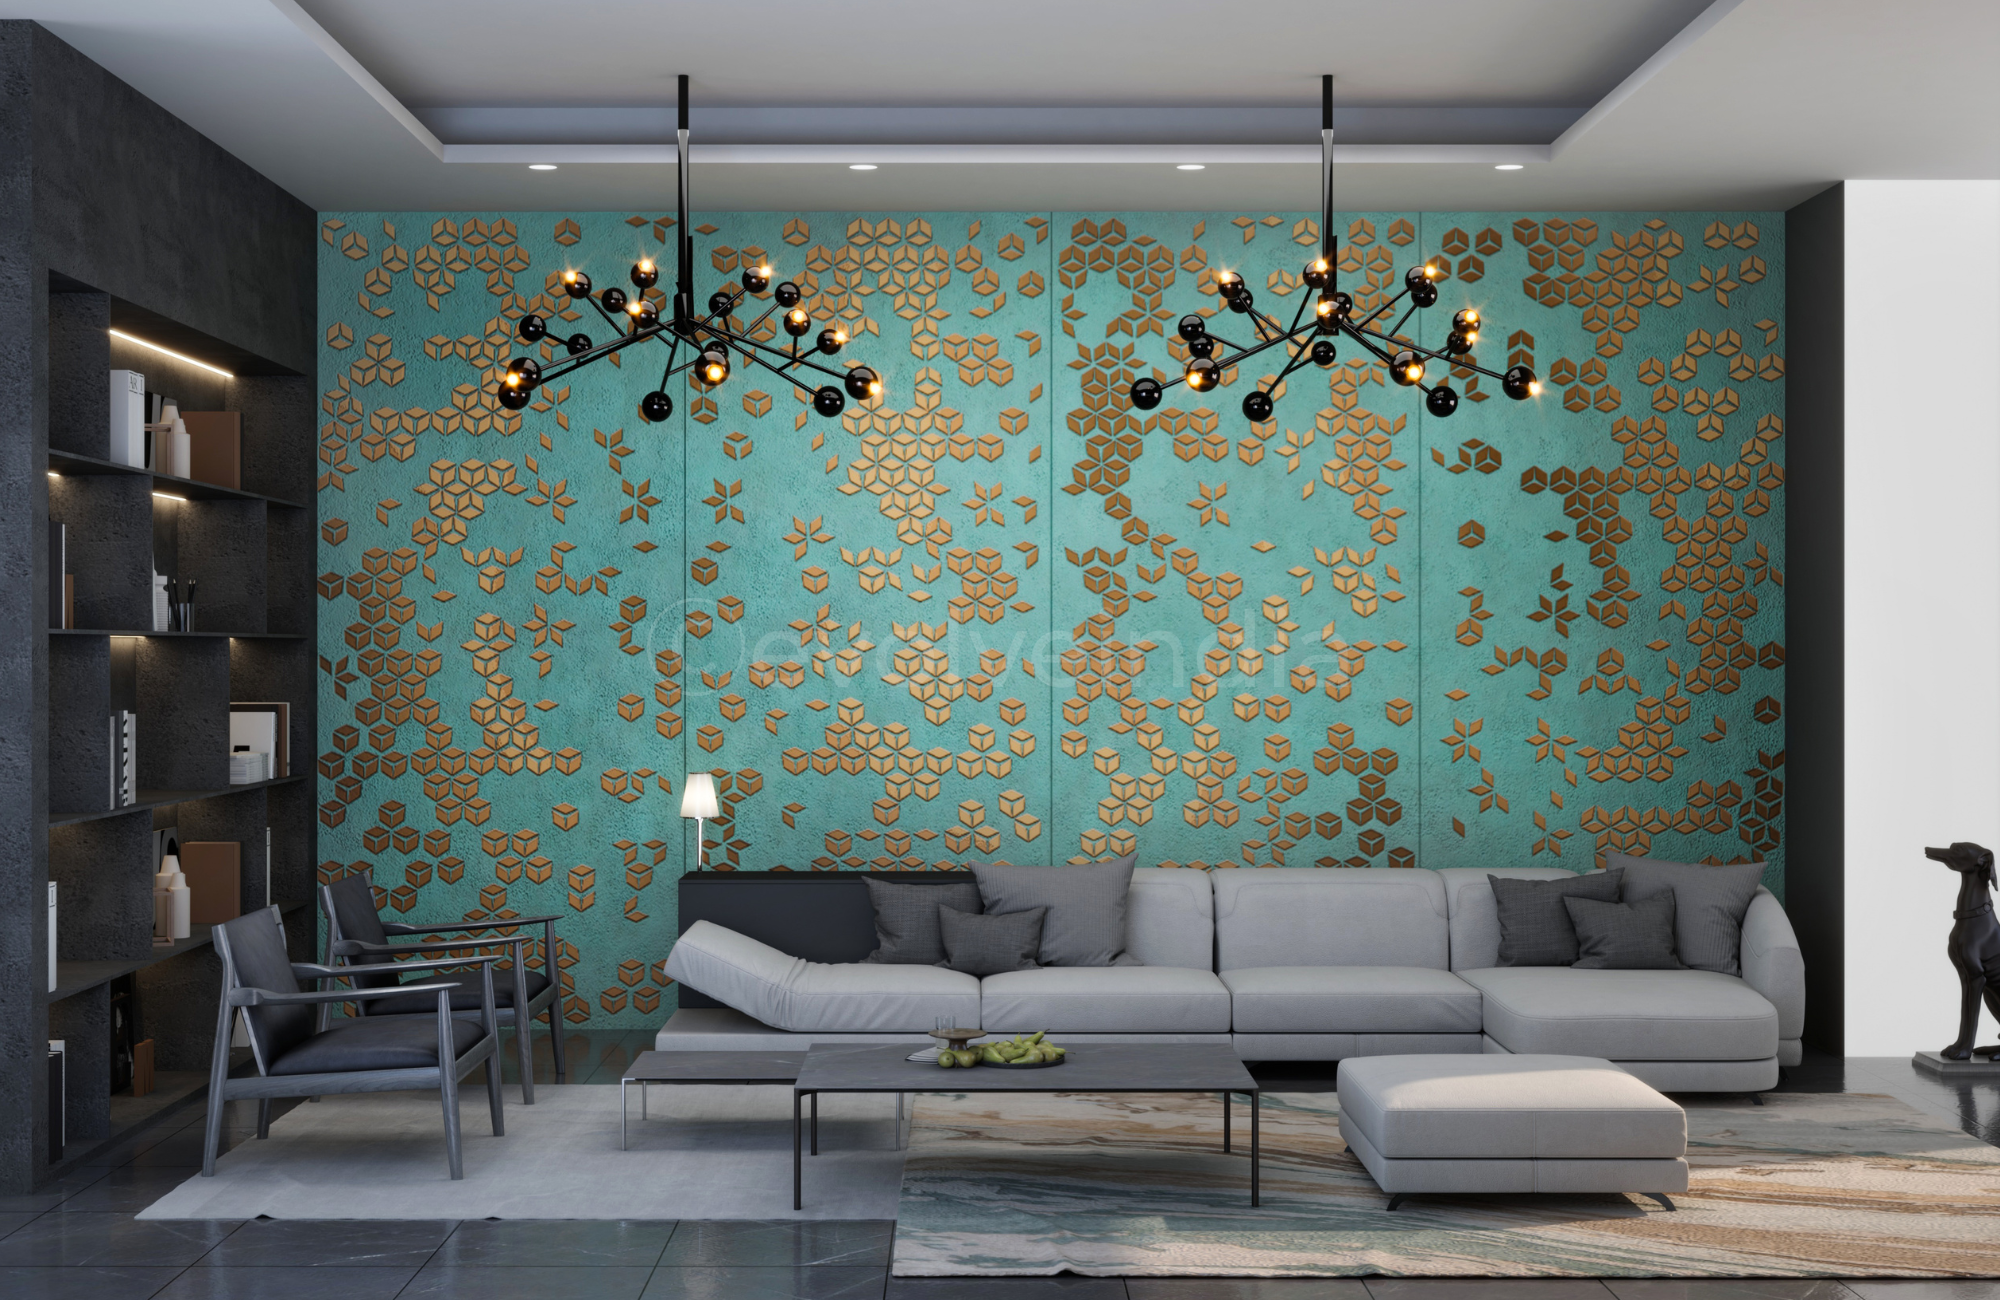 5 Metal Accent Wall Design Ideas For